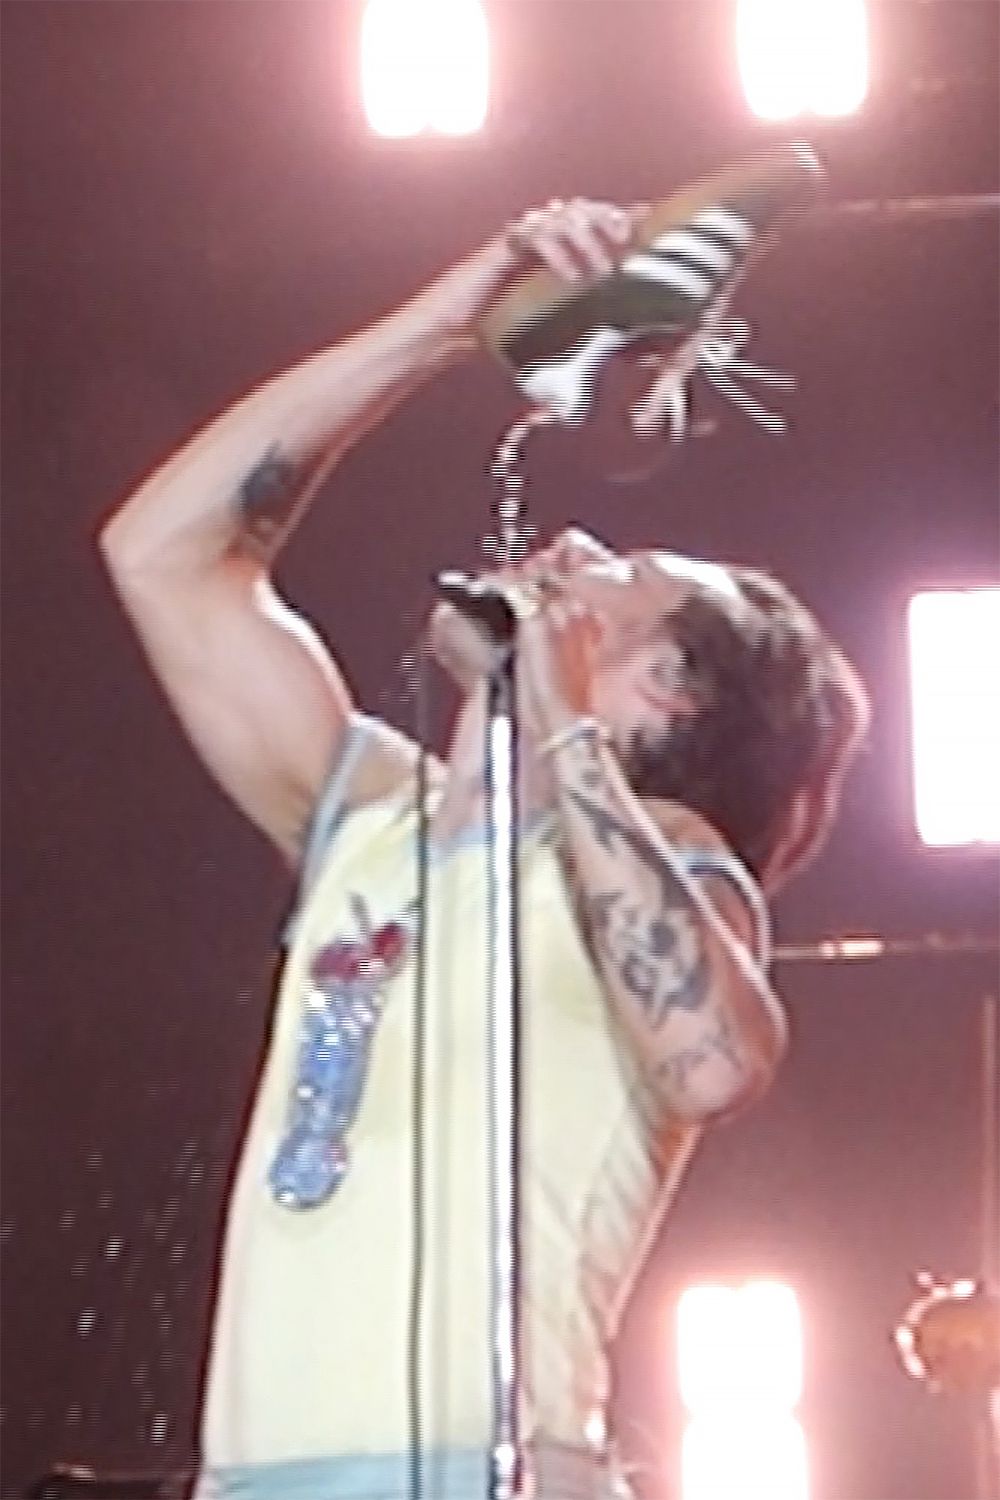 Harry Styles drinks out of his shoe at his concert in Perth, Australia